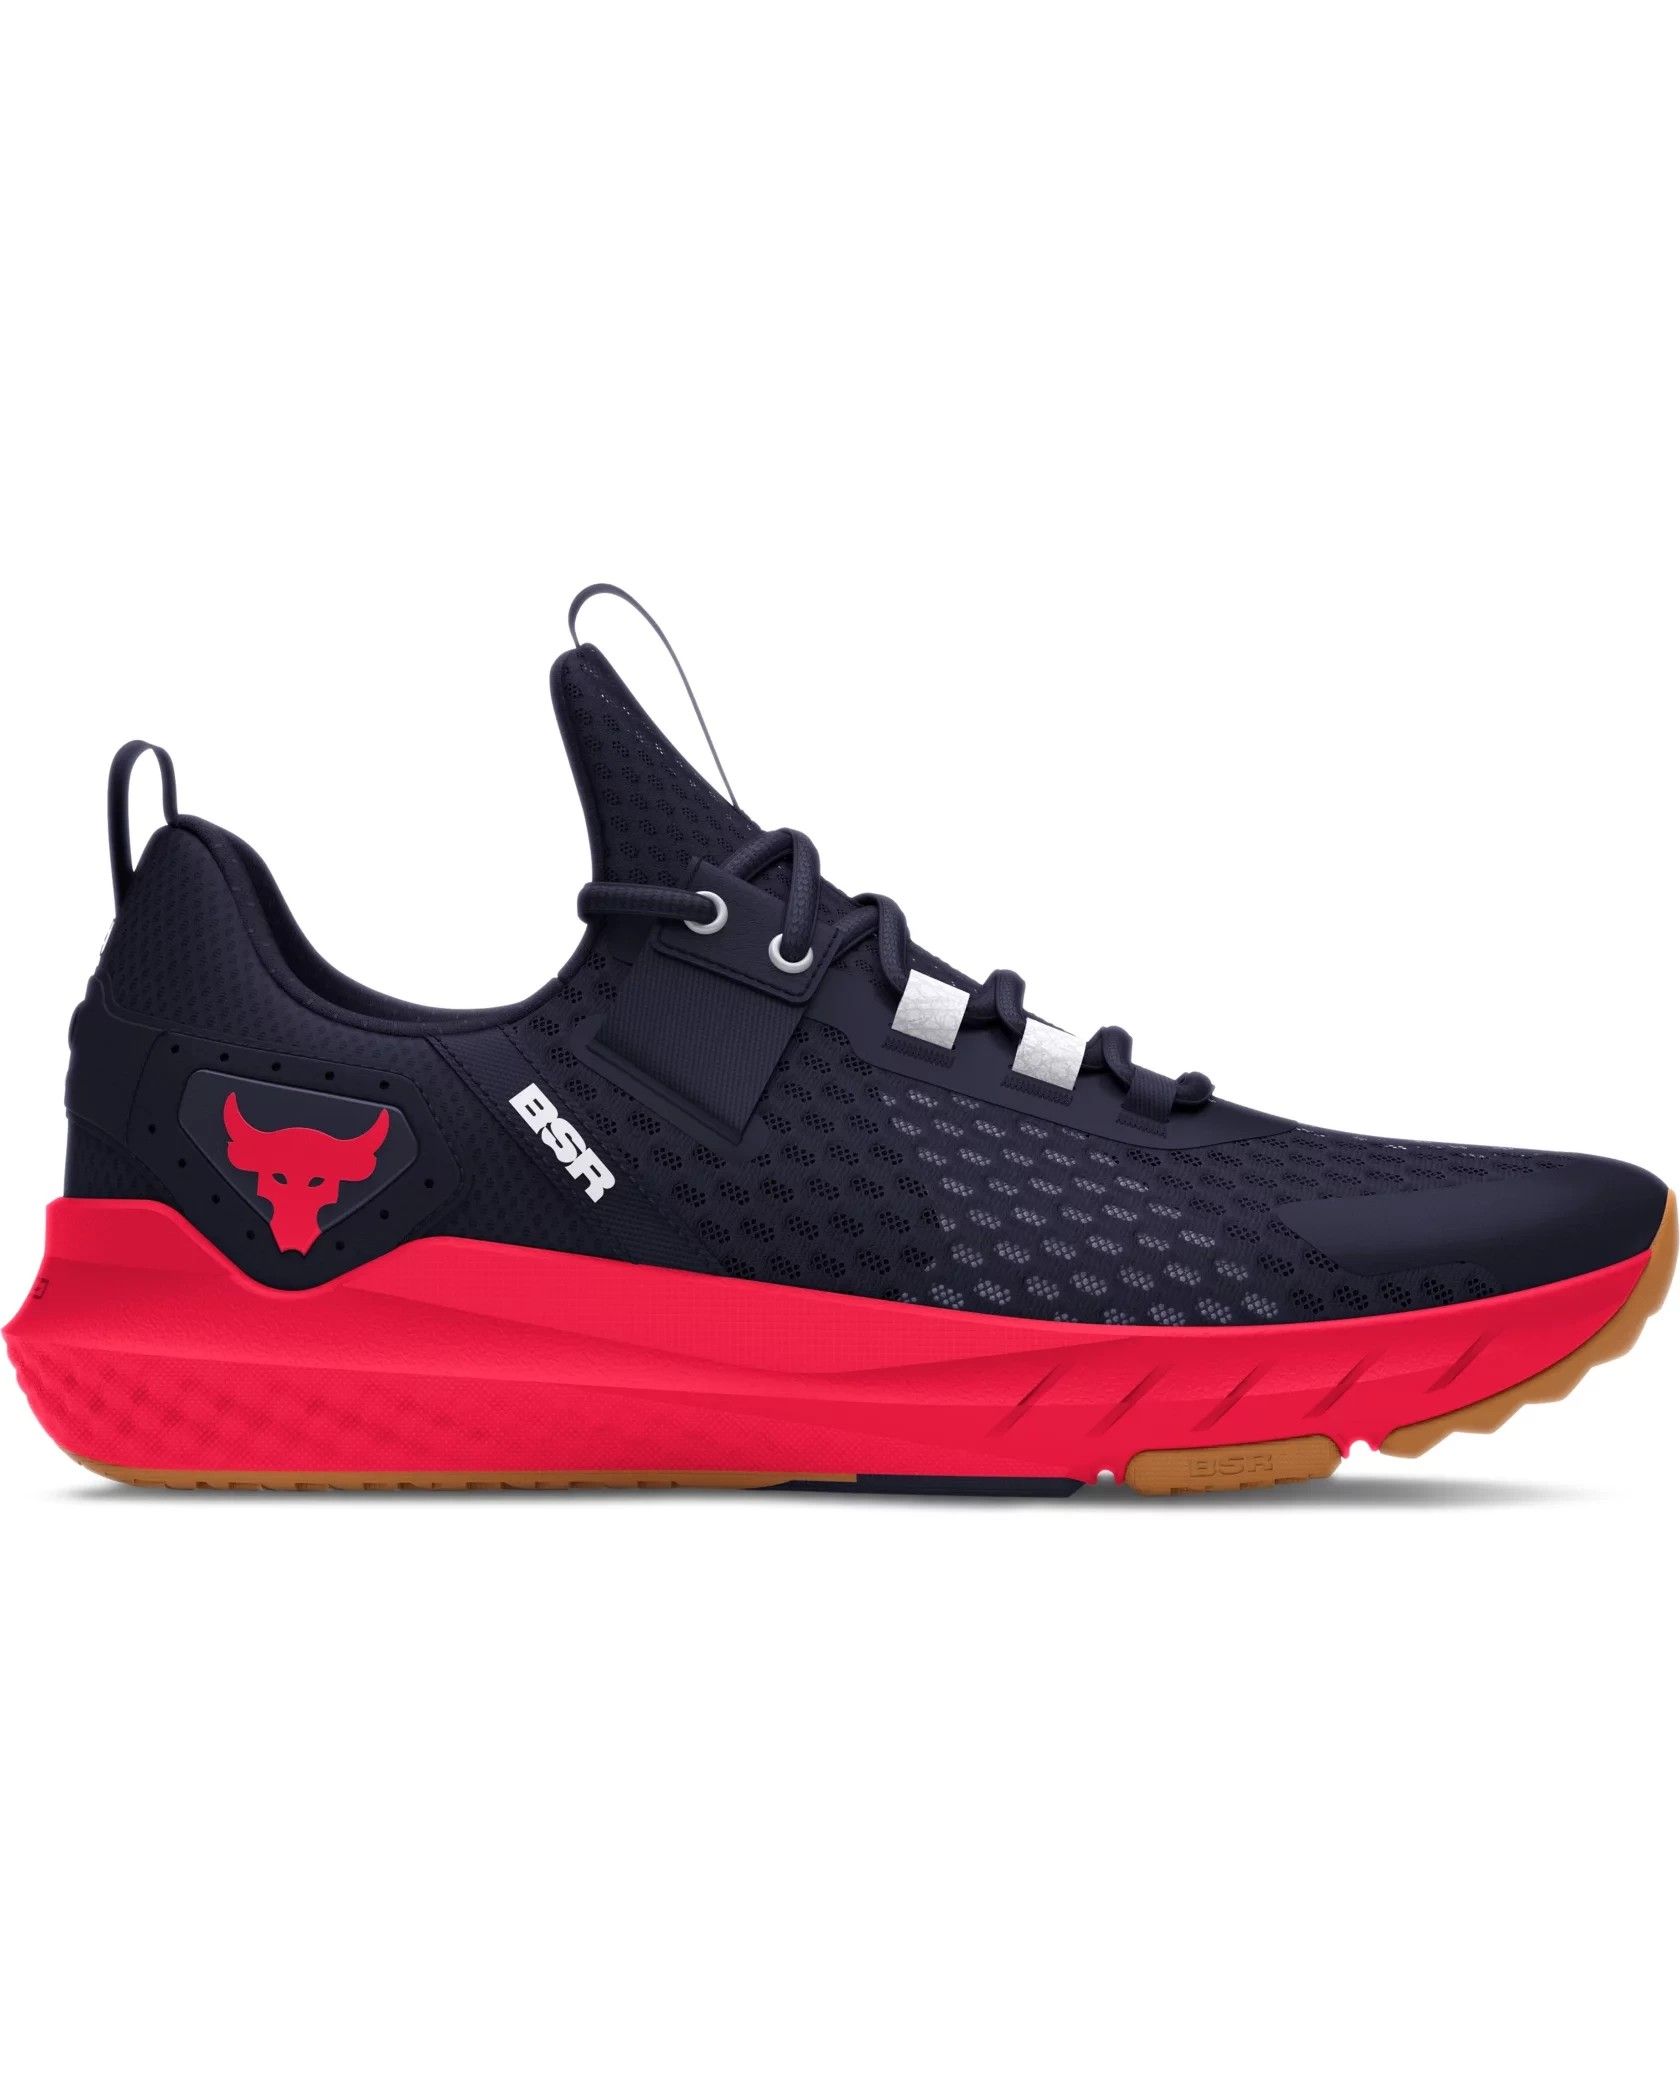 Under Armour Project Rock BSR 4 Black Grey Men Cross Training Shoes  3027344-001